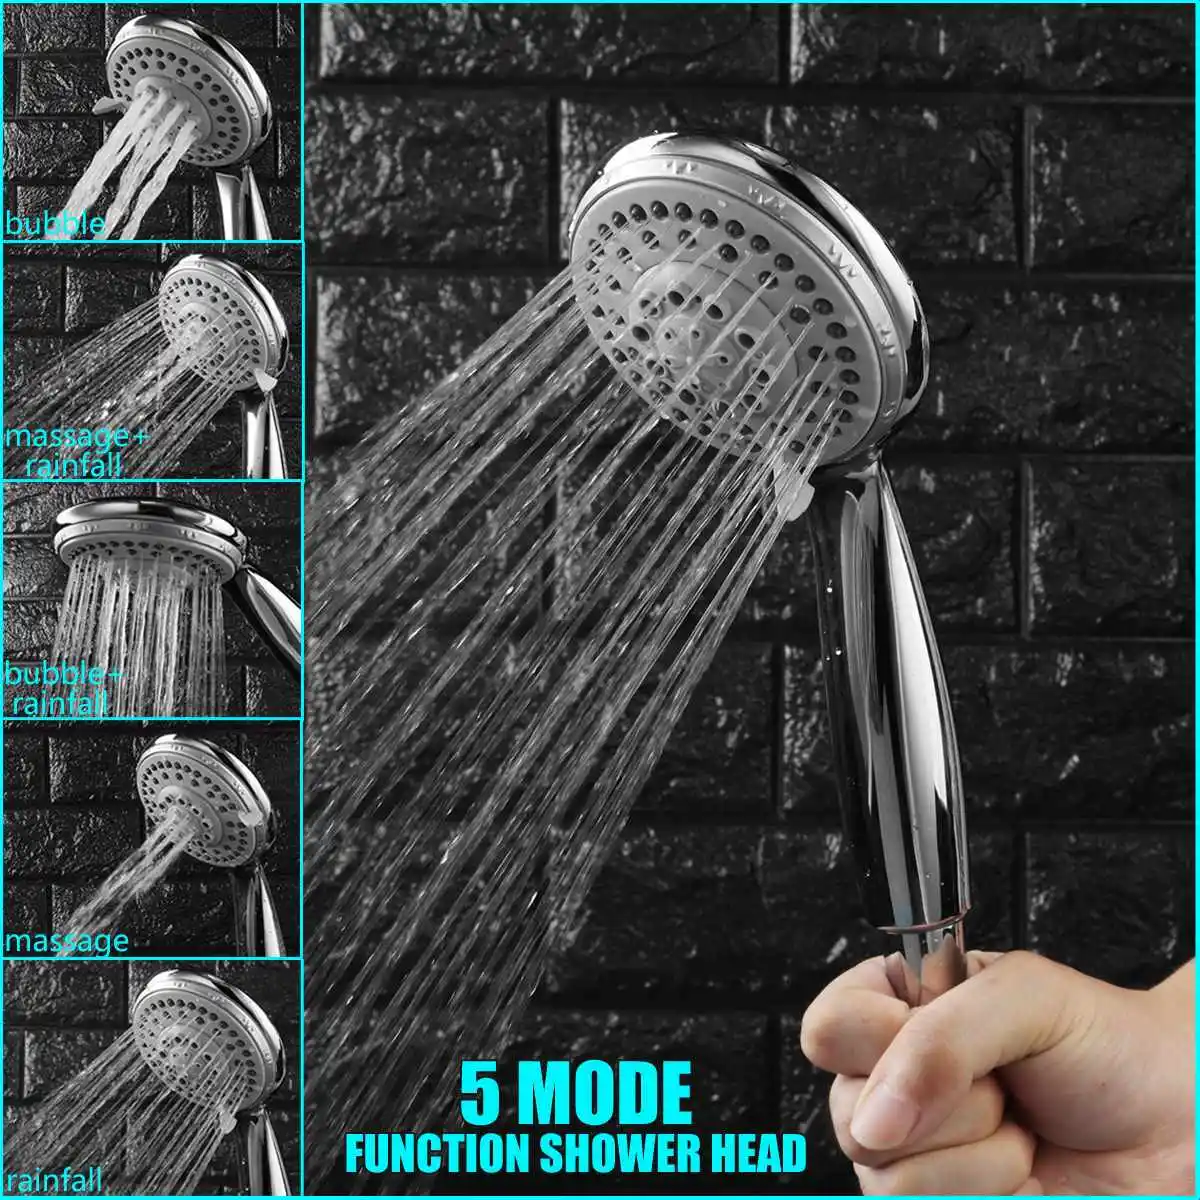 

Universal 5 Modes Functions Bathroom Shower Head ABS Handheld Round Spray Water-saving Spout Rainfall Bubble Massage Pressurized